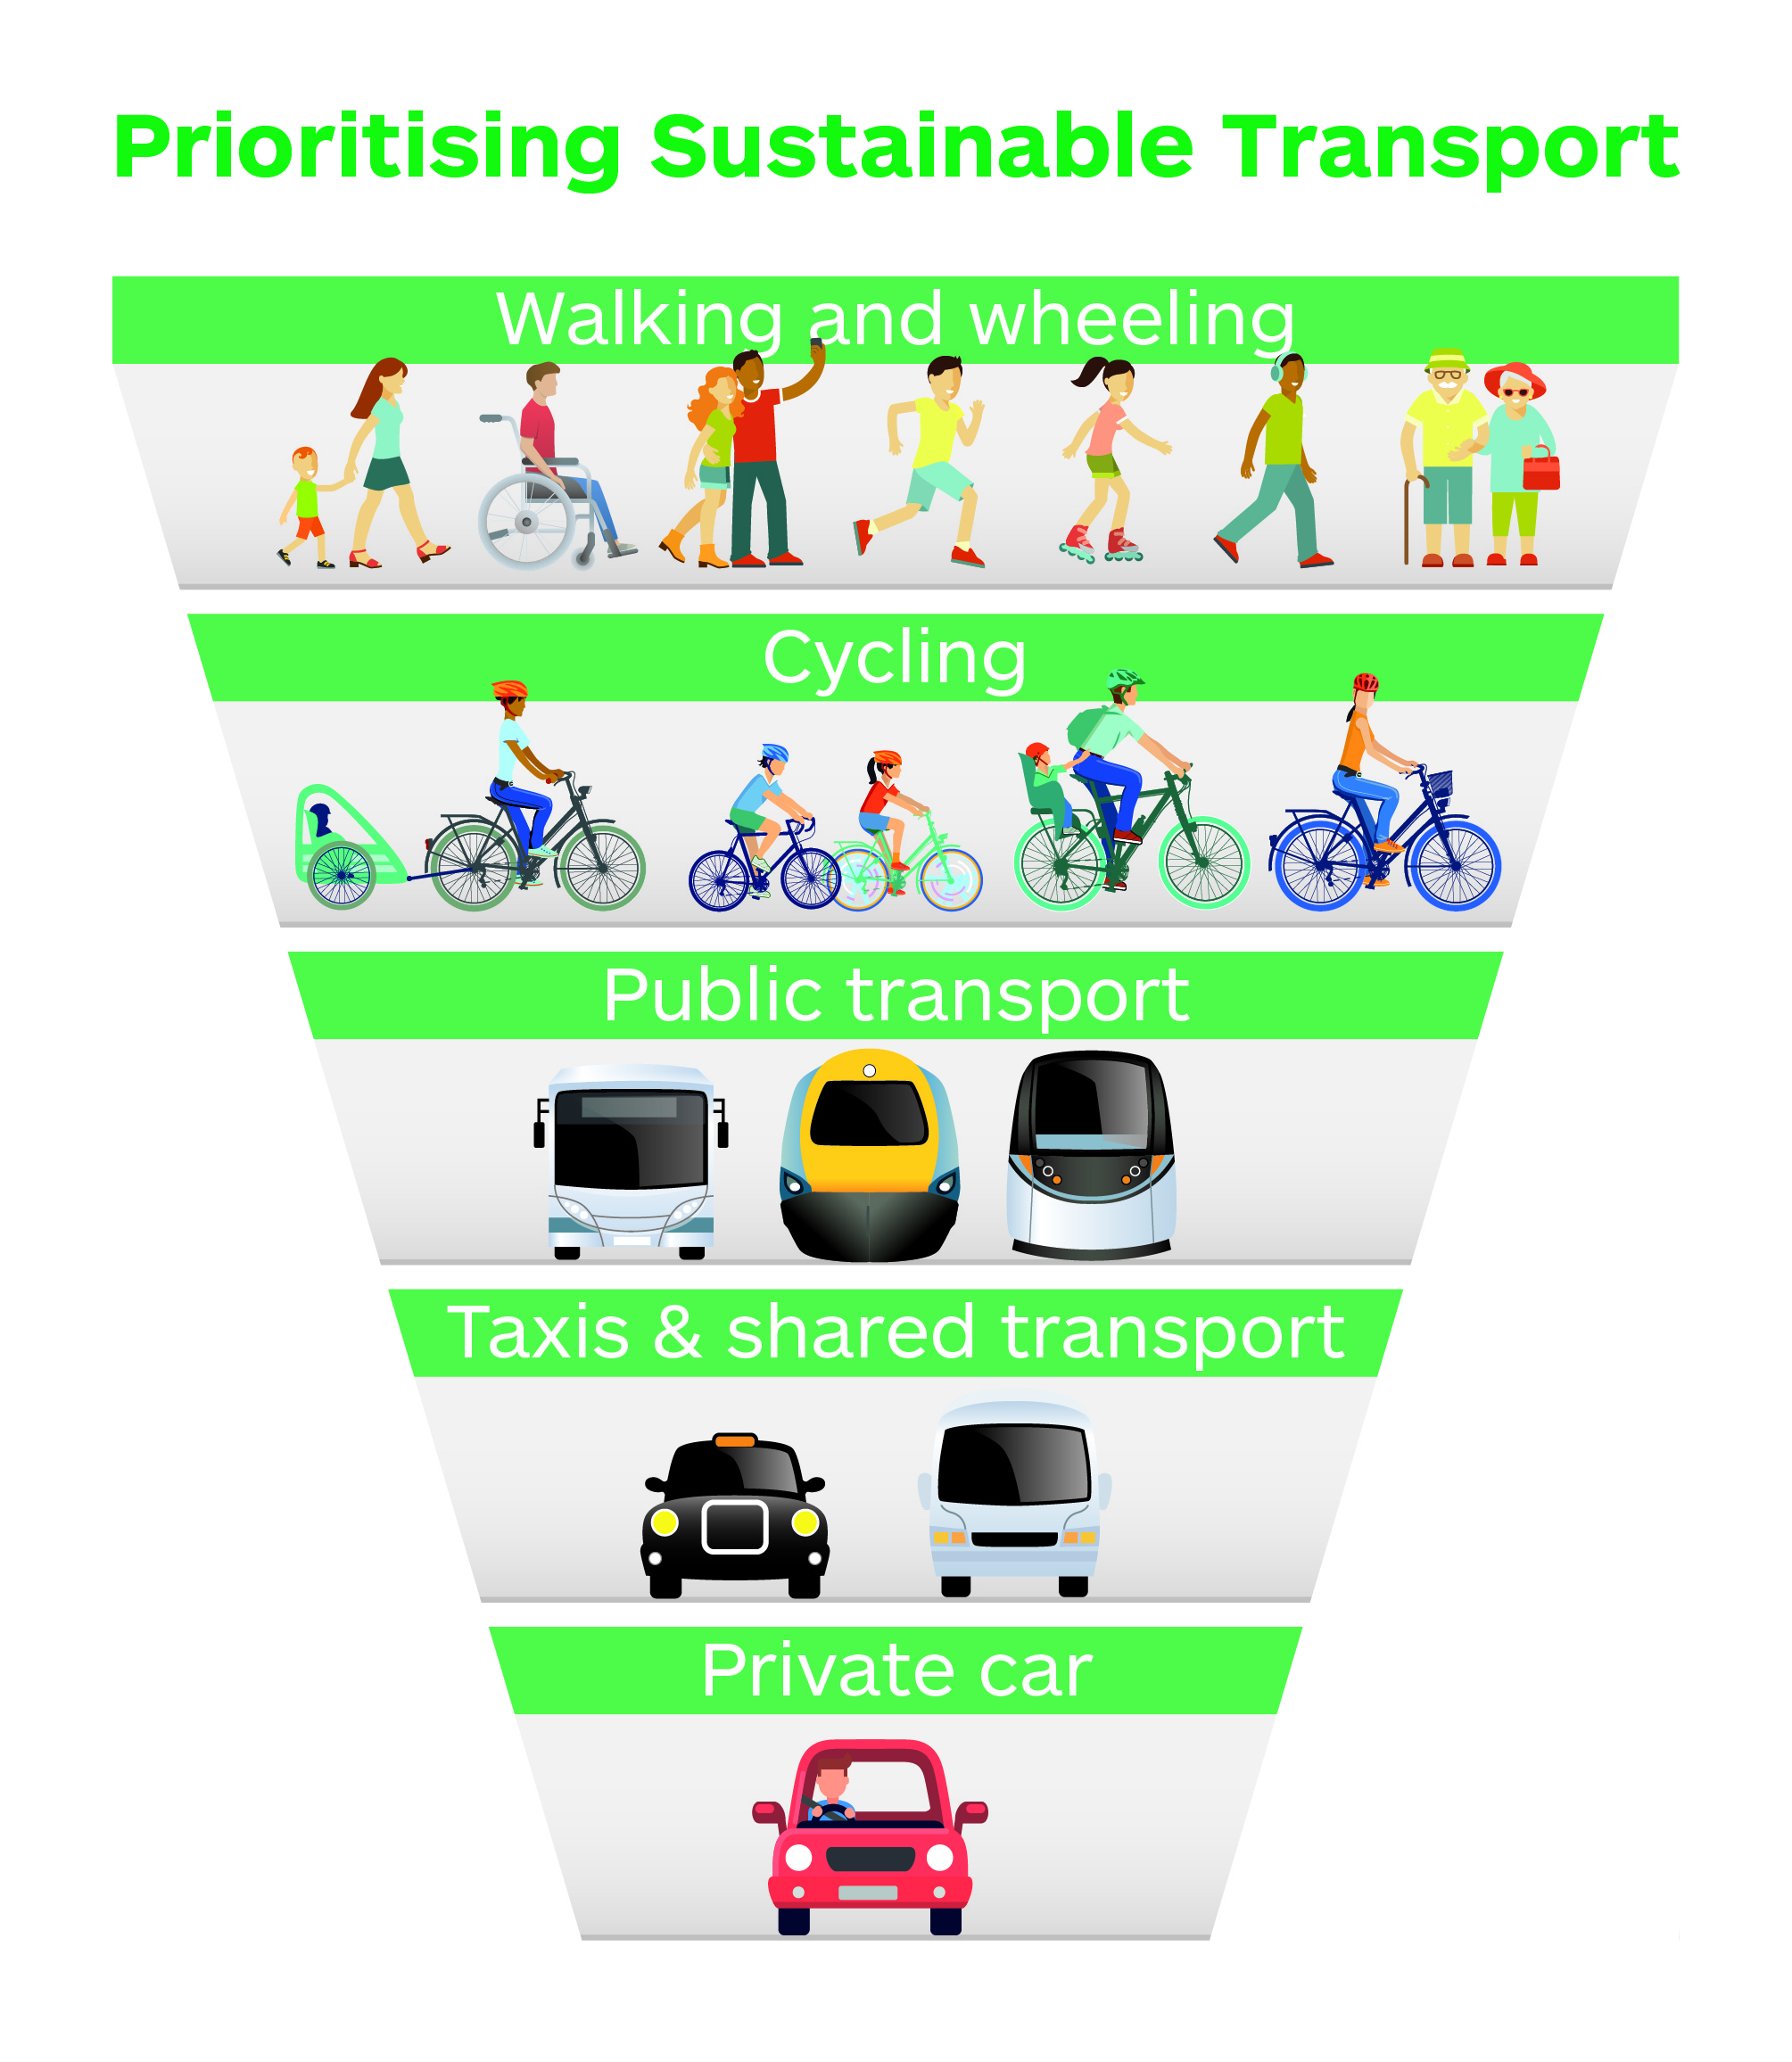 environmental impact of transportation to tourism and leisure activities